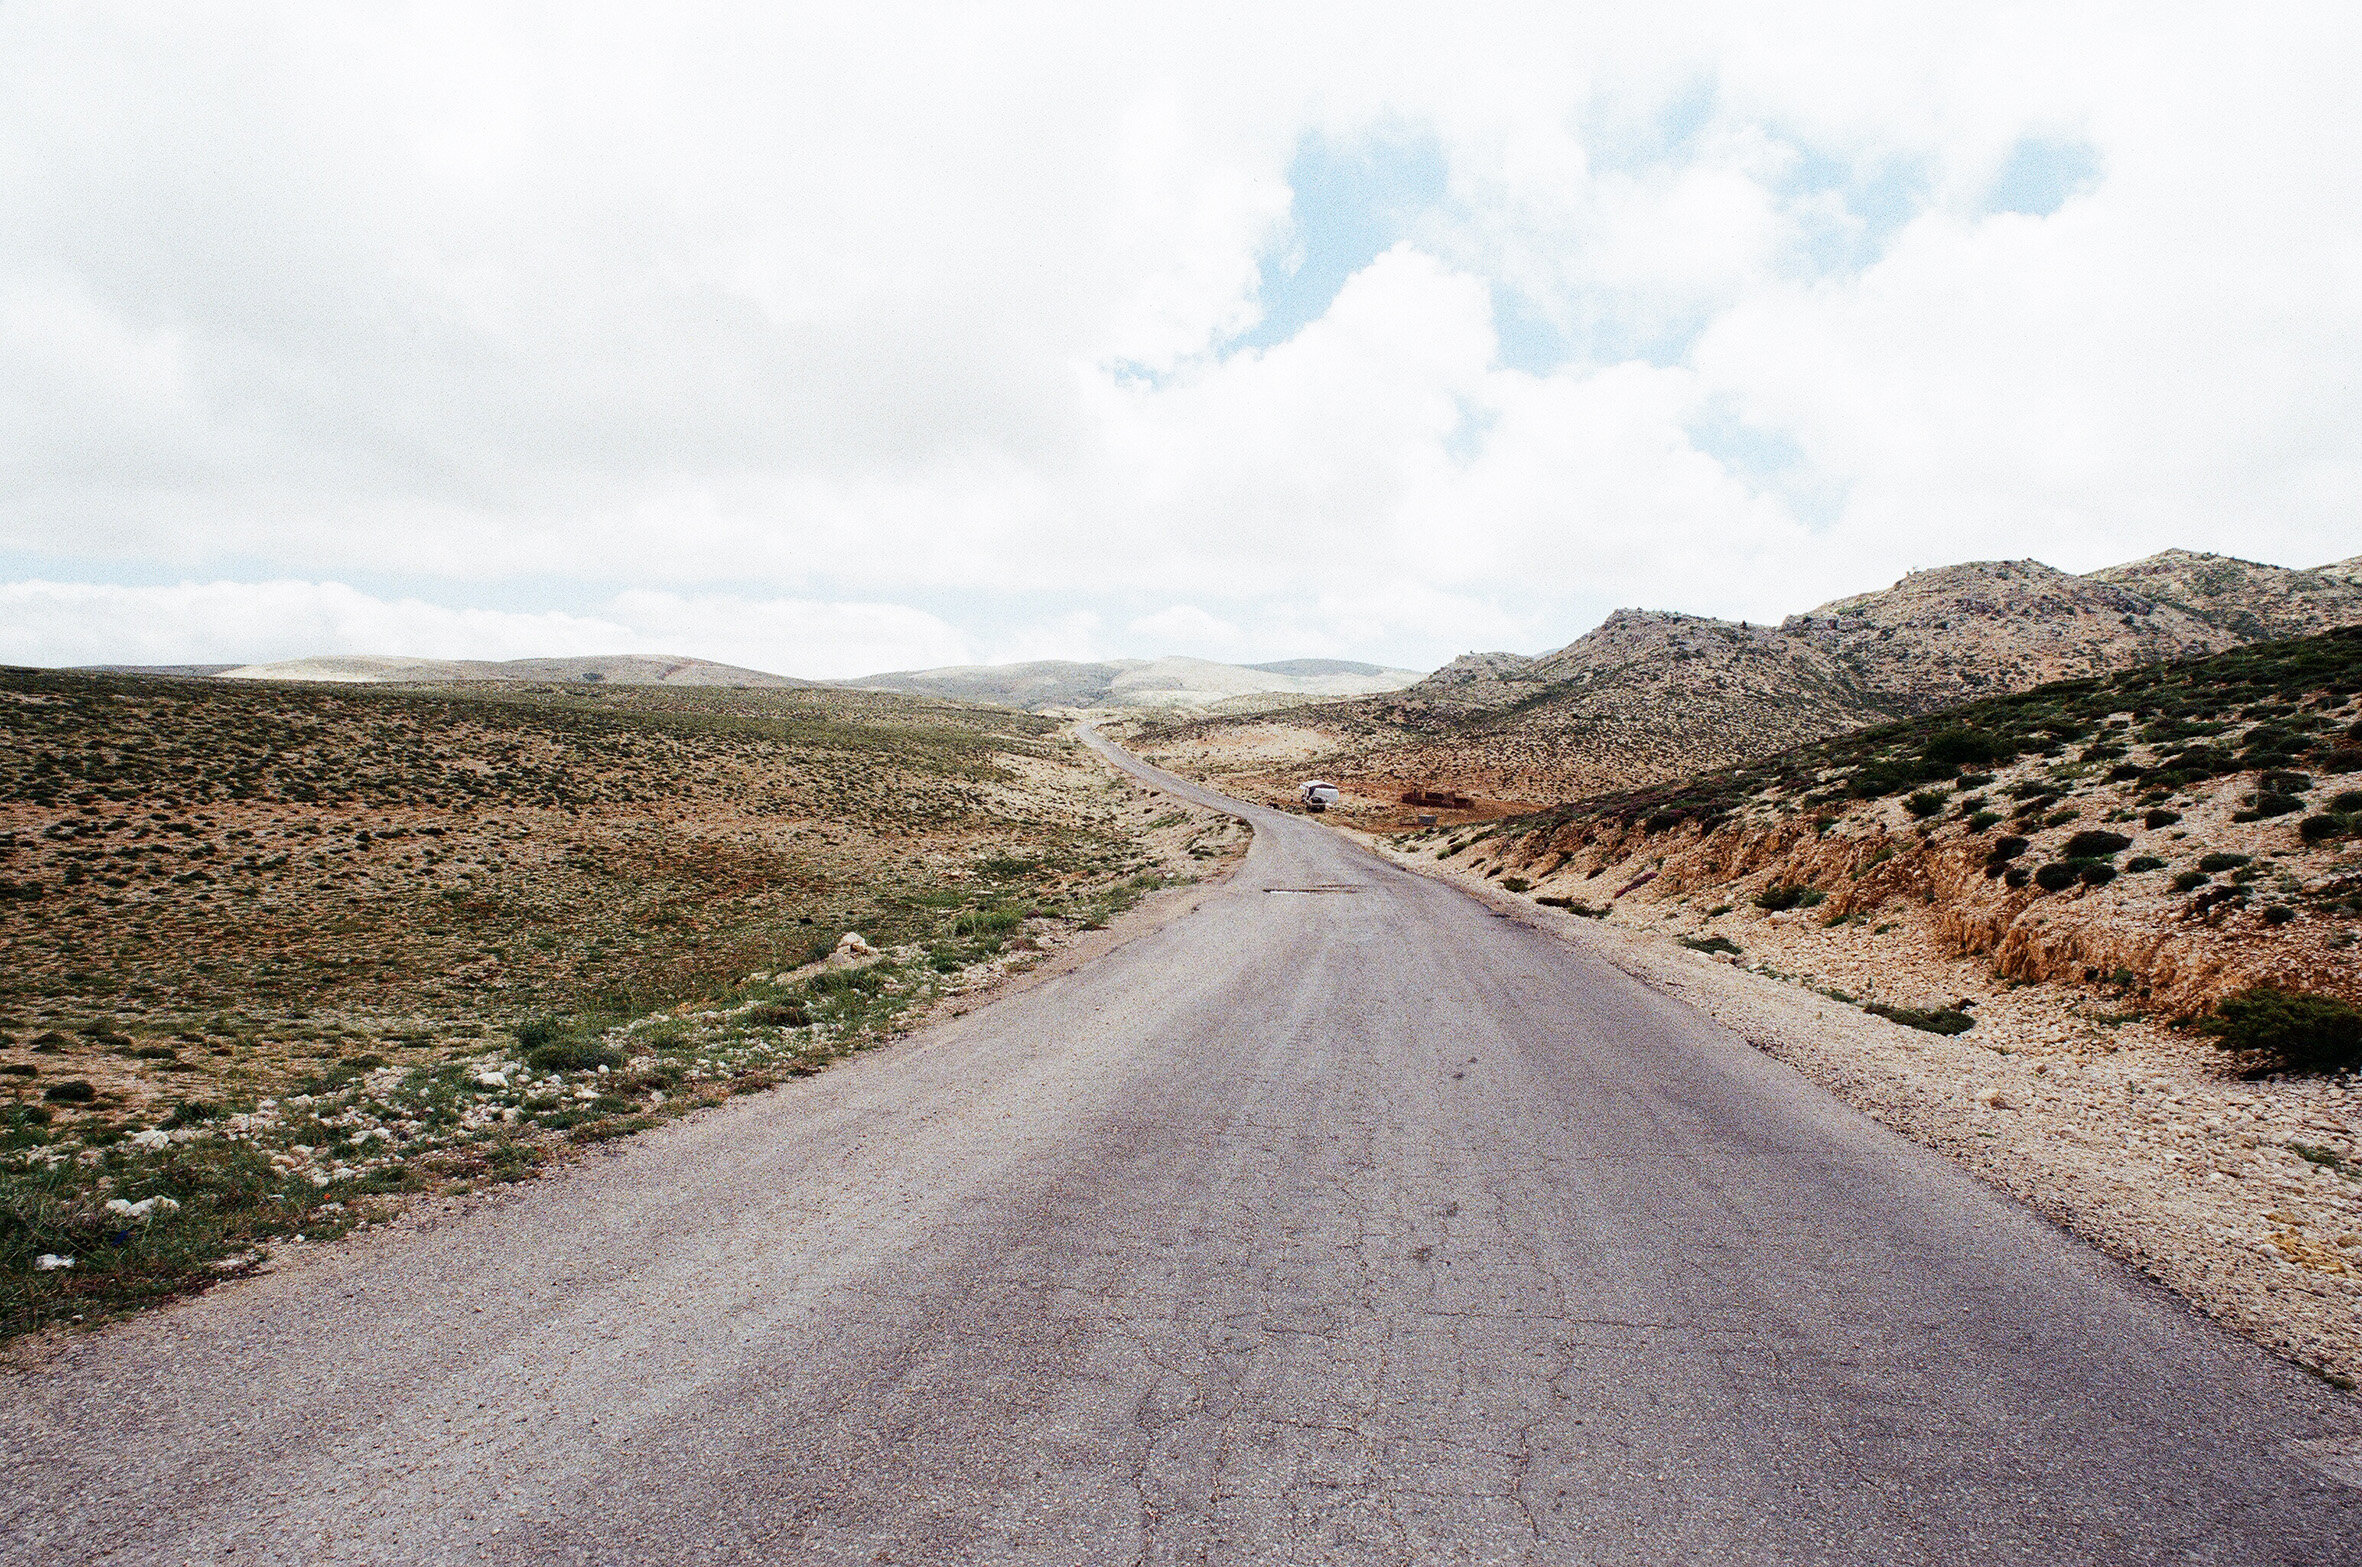  This series focuses on a single road that crosses one of the highest points of the northern ridge of Mount Lebanon, linking the high remote villages of the western slopes with the Beqaa valley.  